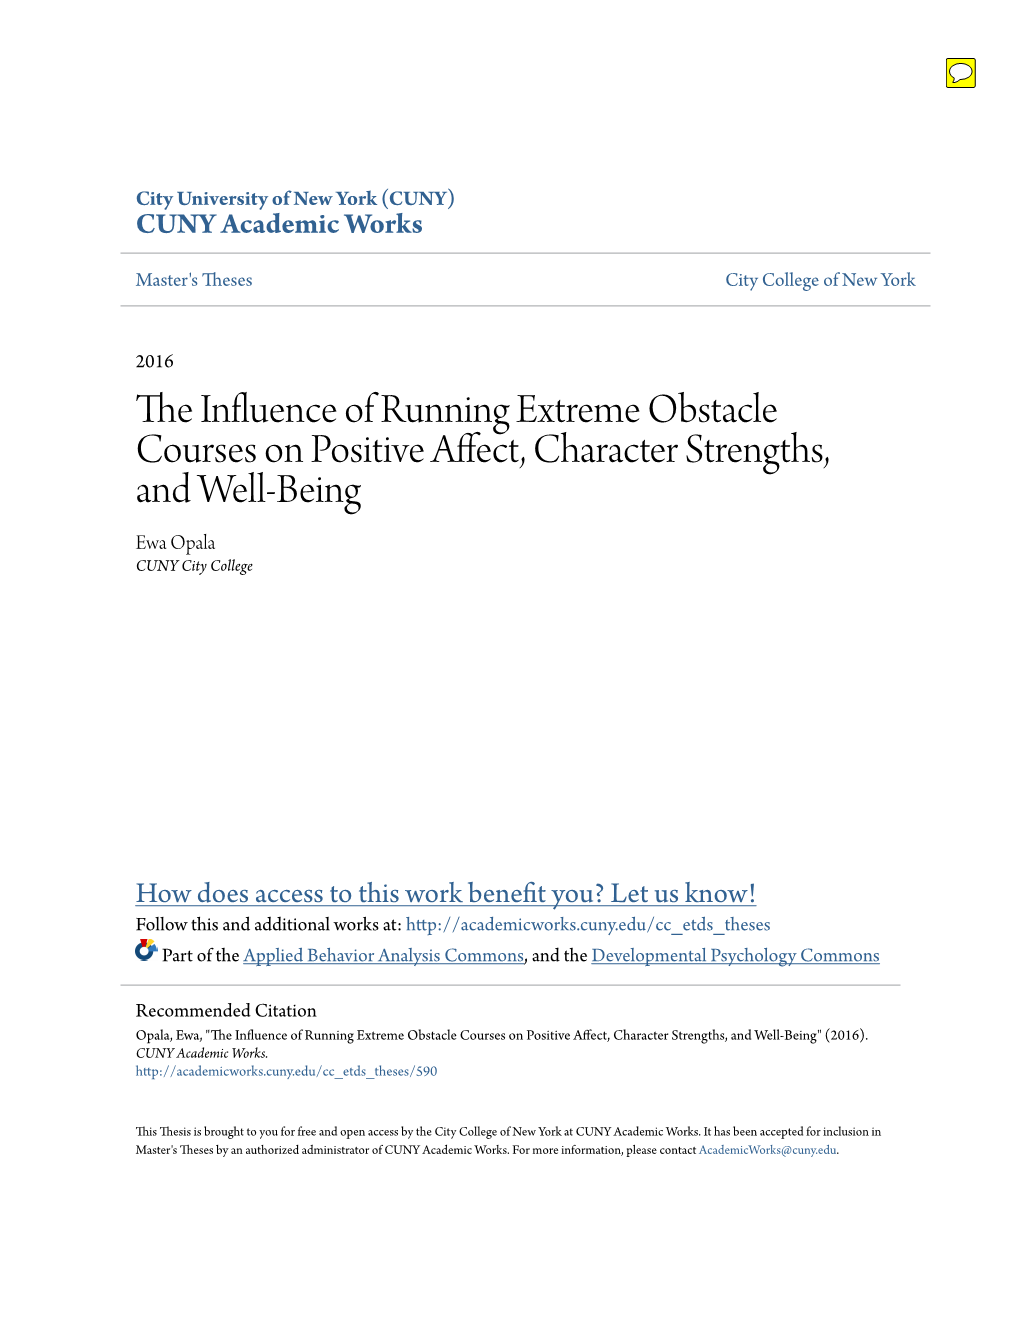 The Influence of Running Extreme Obstacle Courses on Positive Affect, Character Strengths